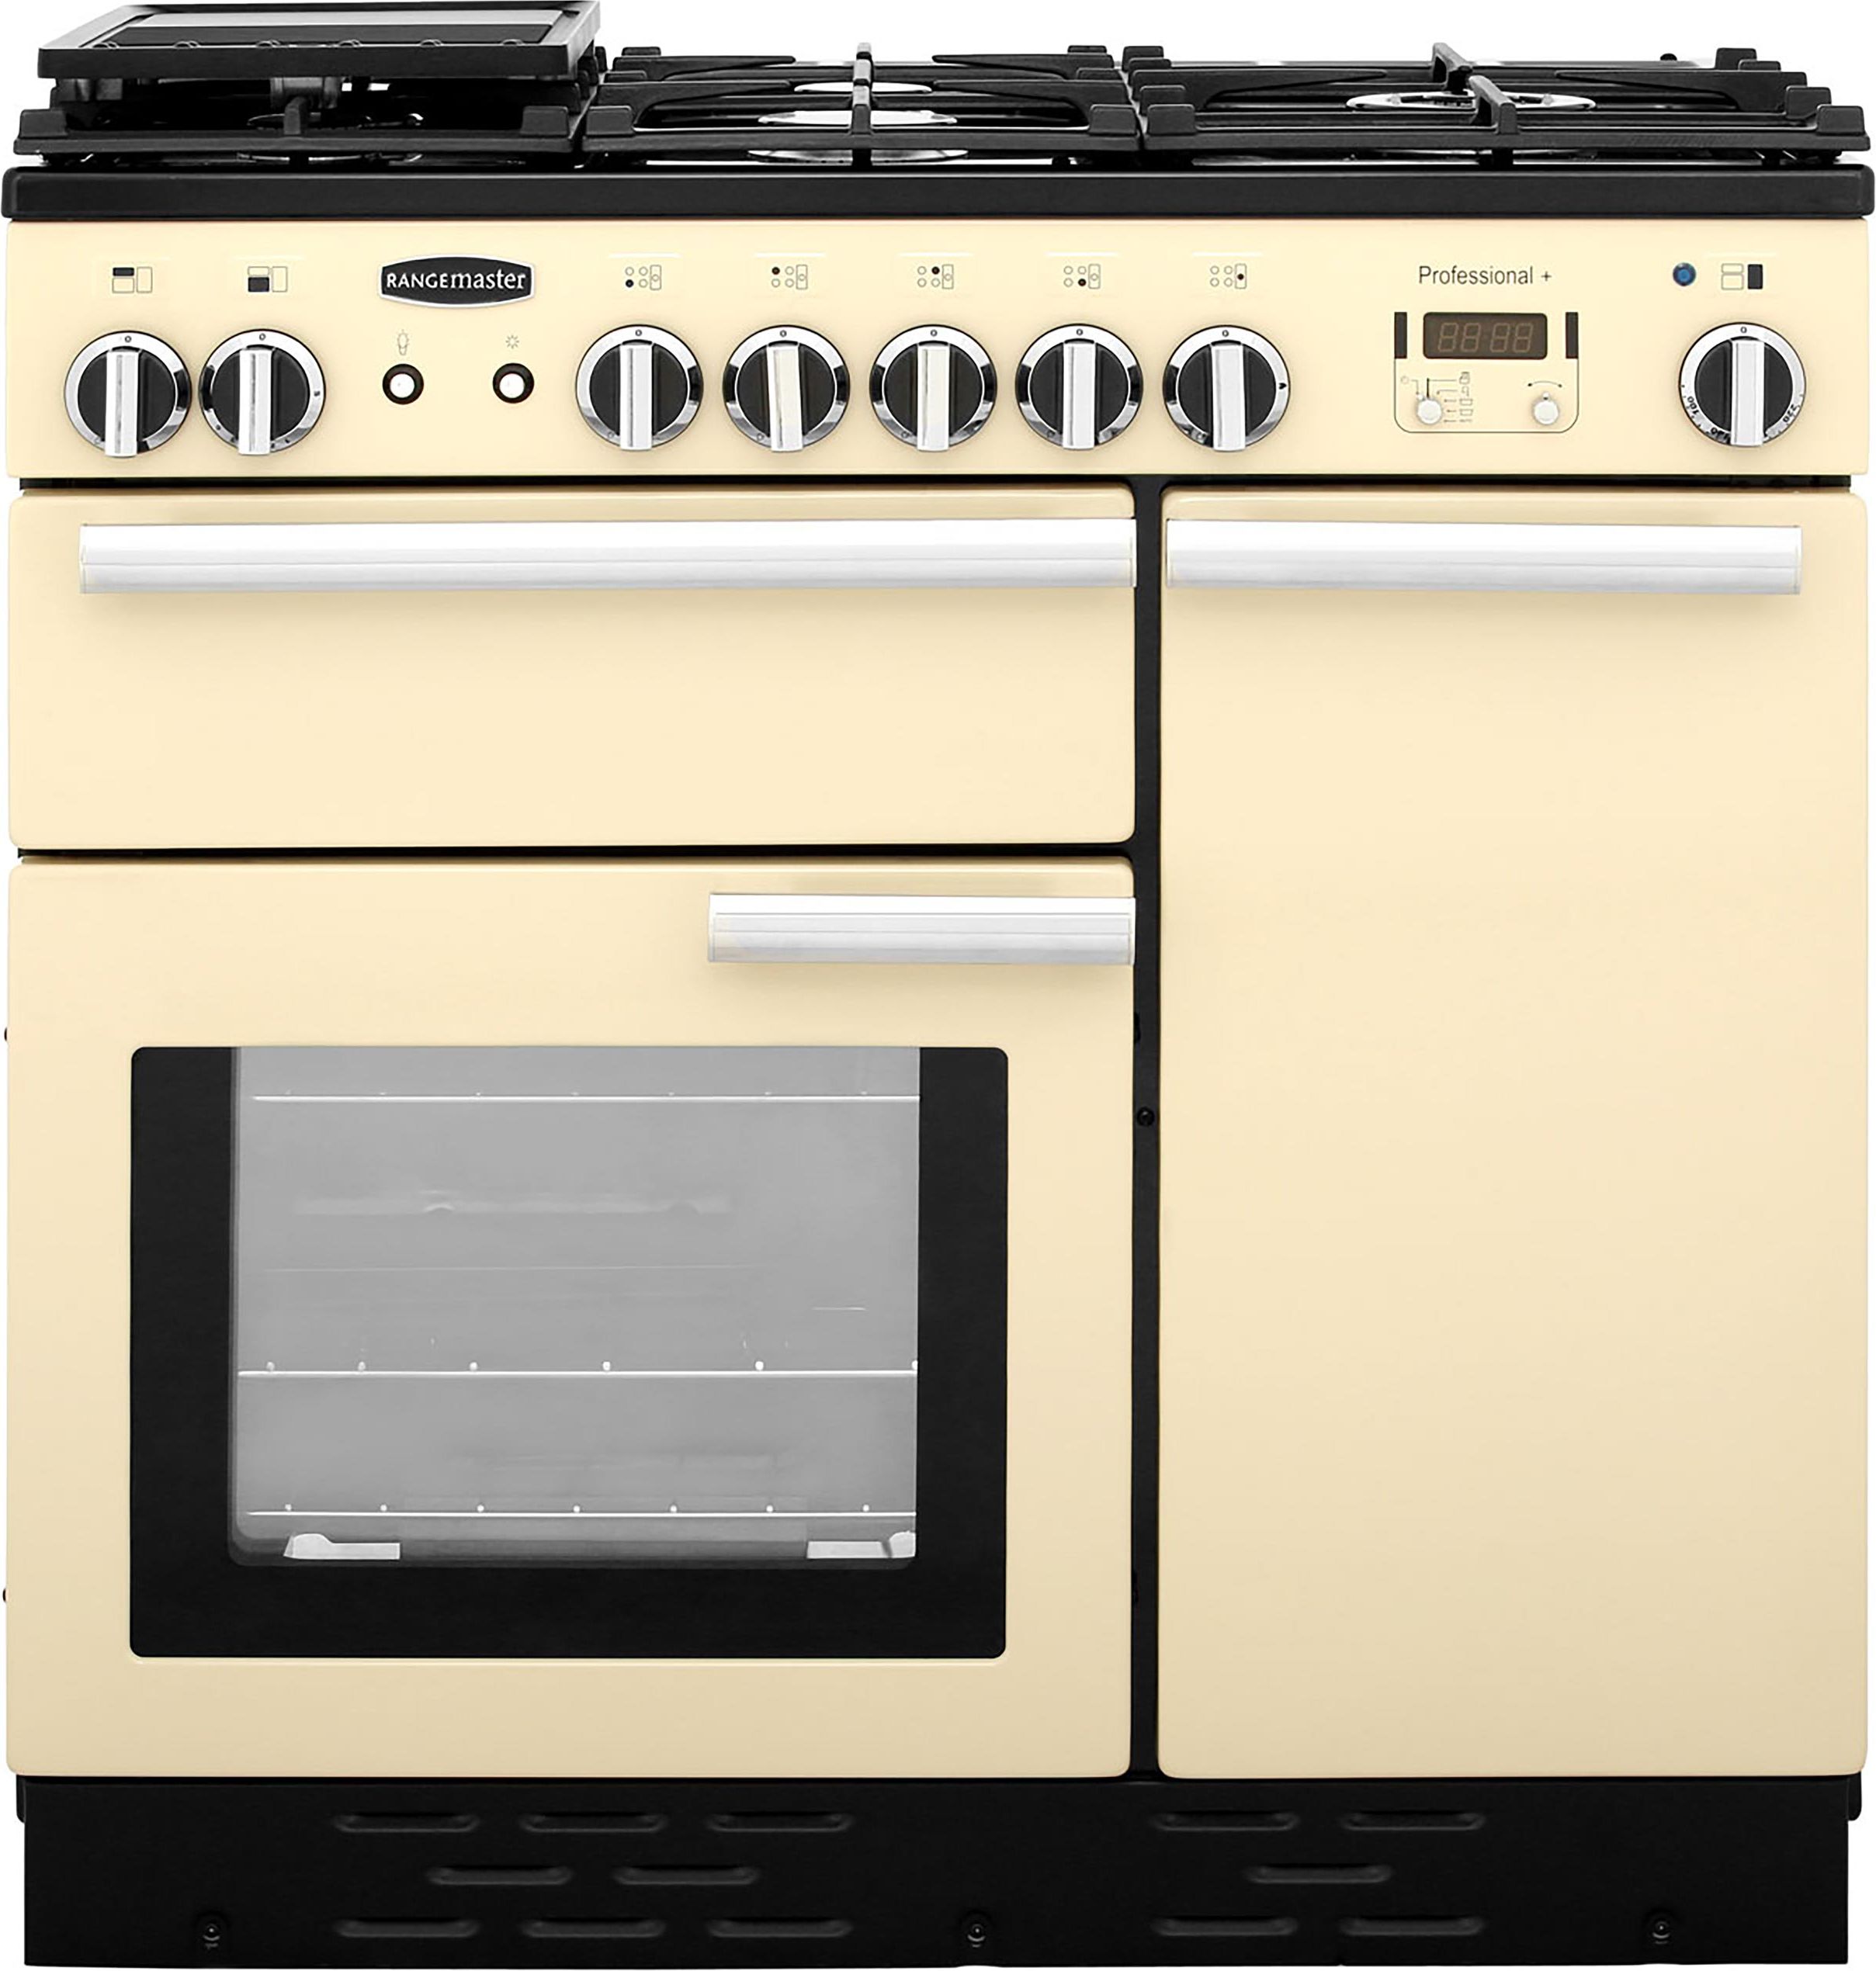 Rangemaster Professional Plus PROP90NGFCR/C 90cm Gas Range Cooker with Electric Fan Oven - Cream - A+/A Rated, Cream